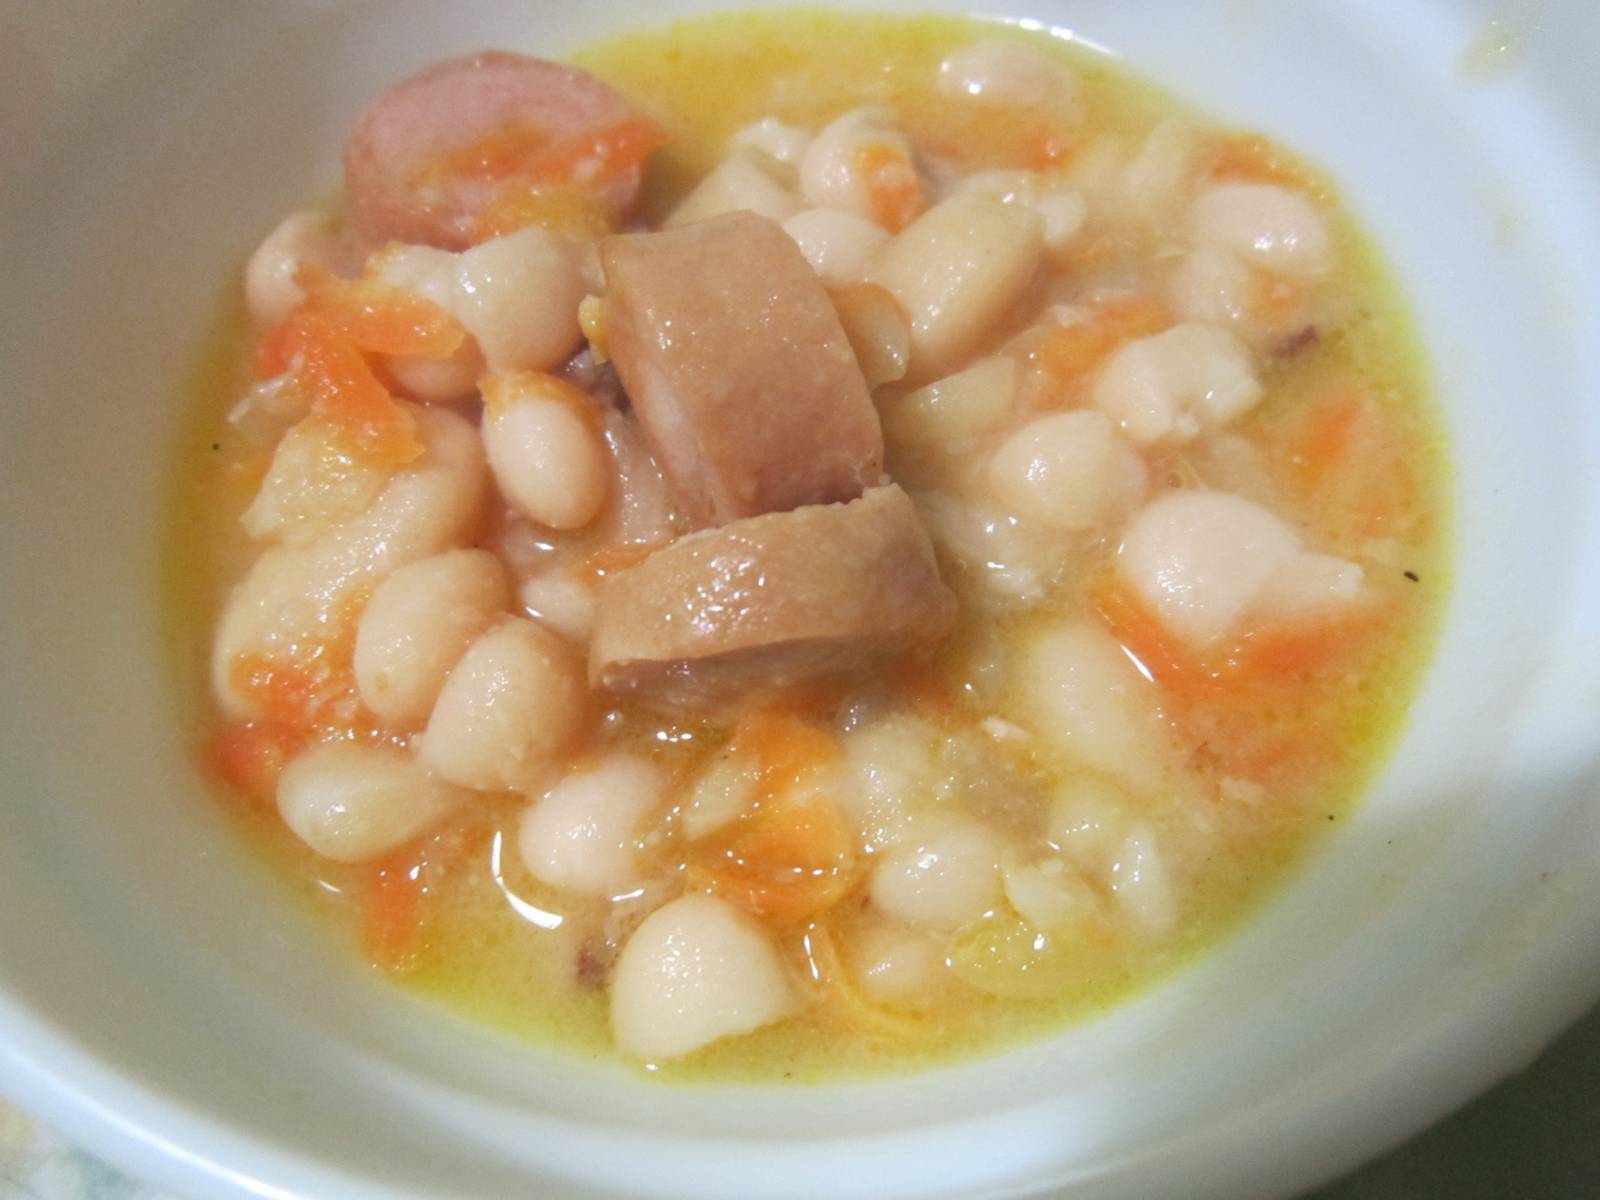 Beans in Balkan style with smoked meats